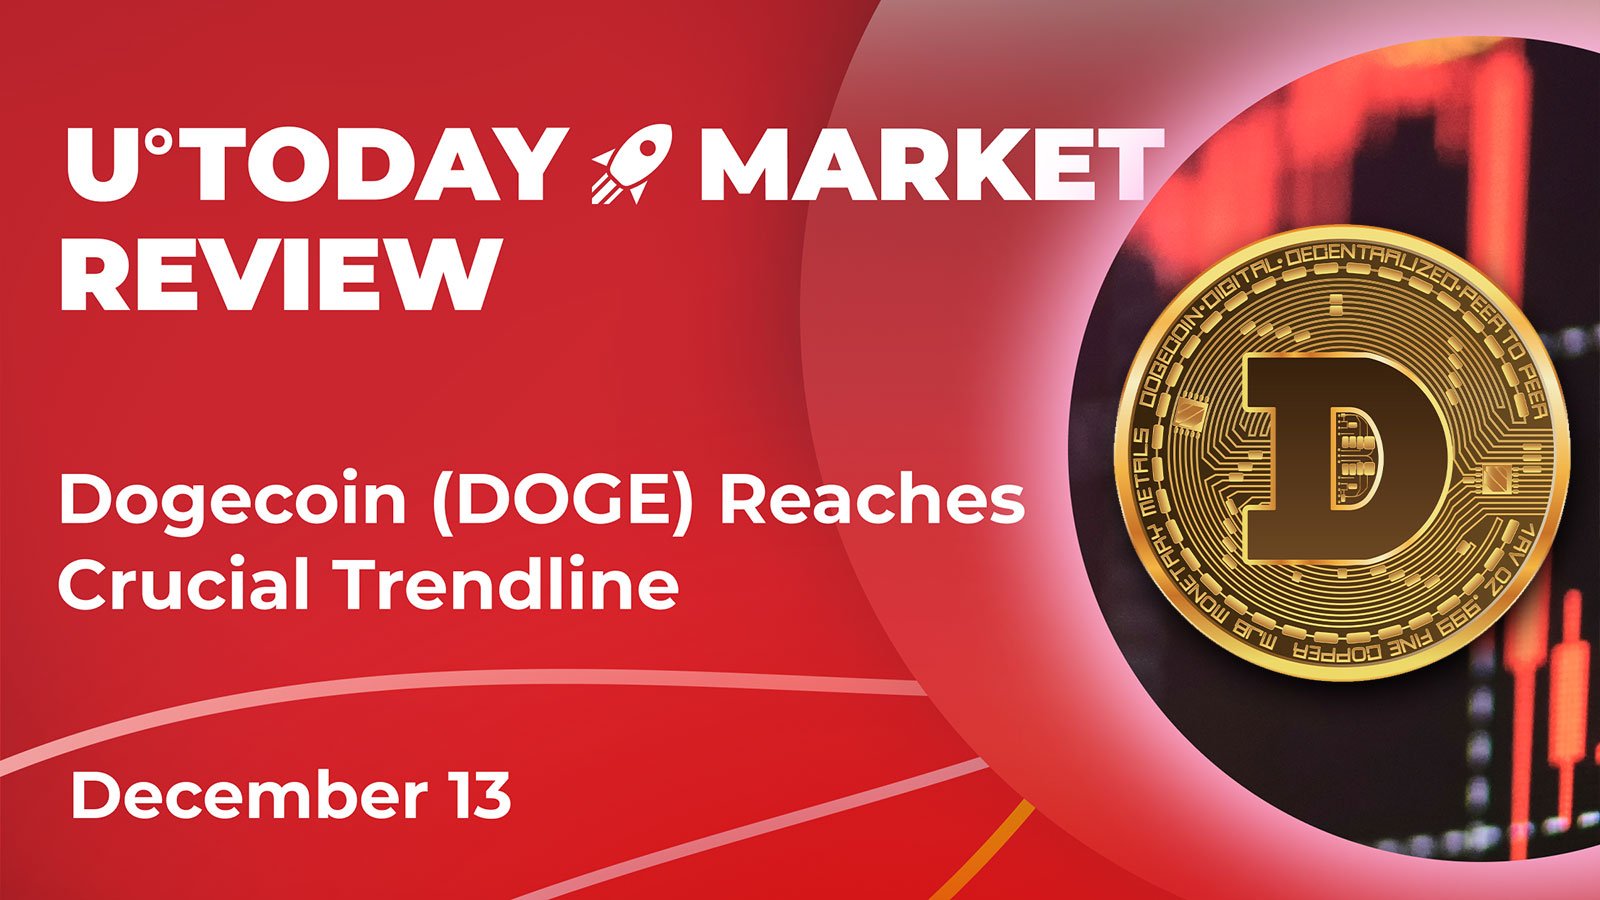 Dogecoin (DOGE) Reaches Crucial Trendline: Crypto Market Review, Dec. 13